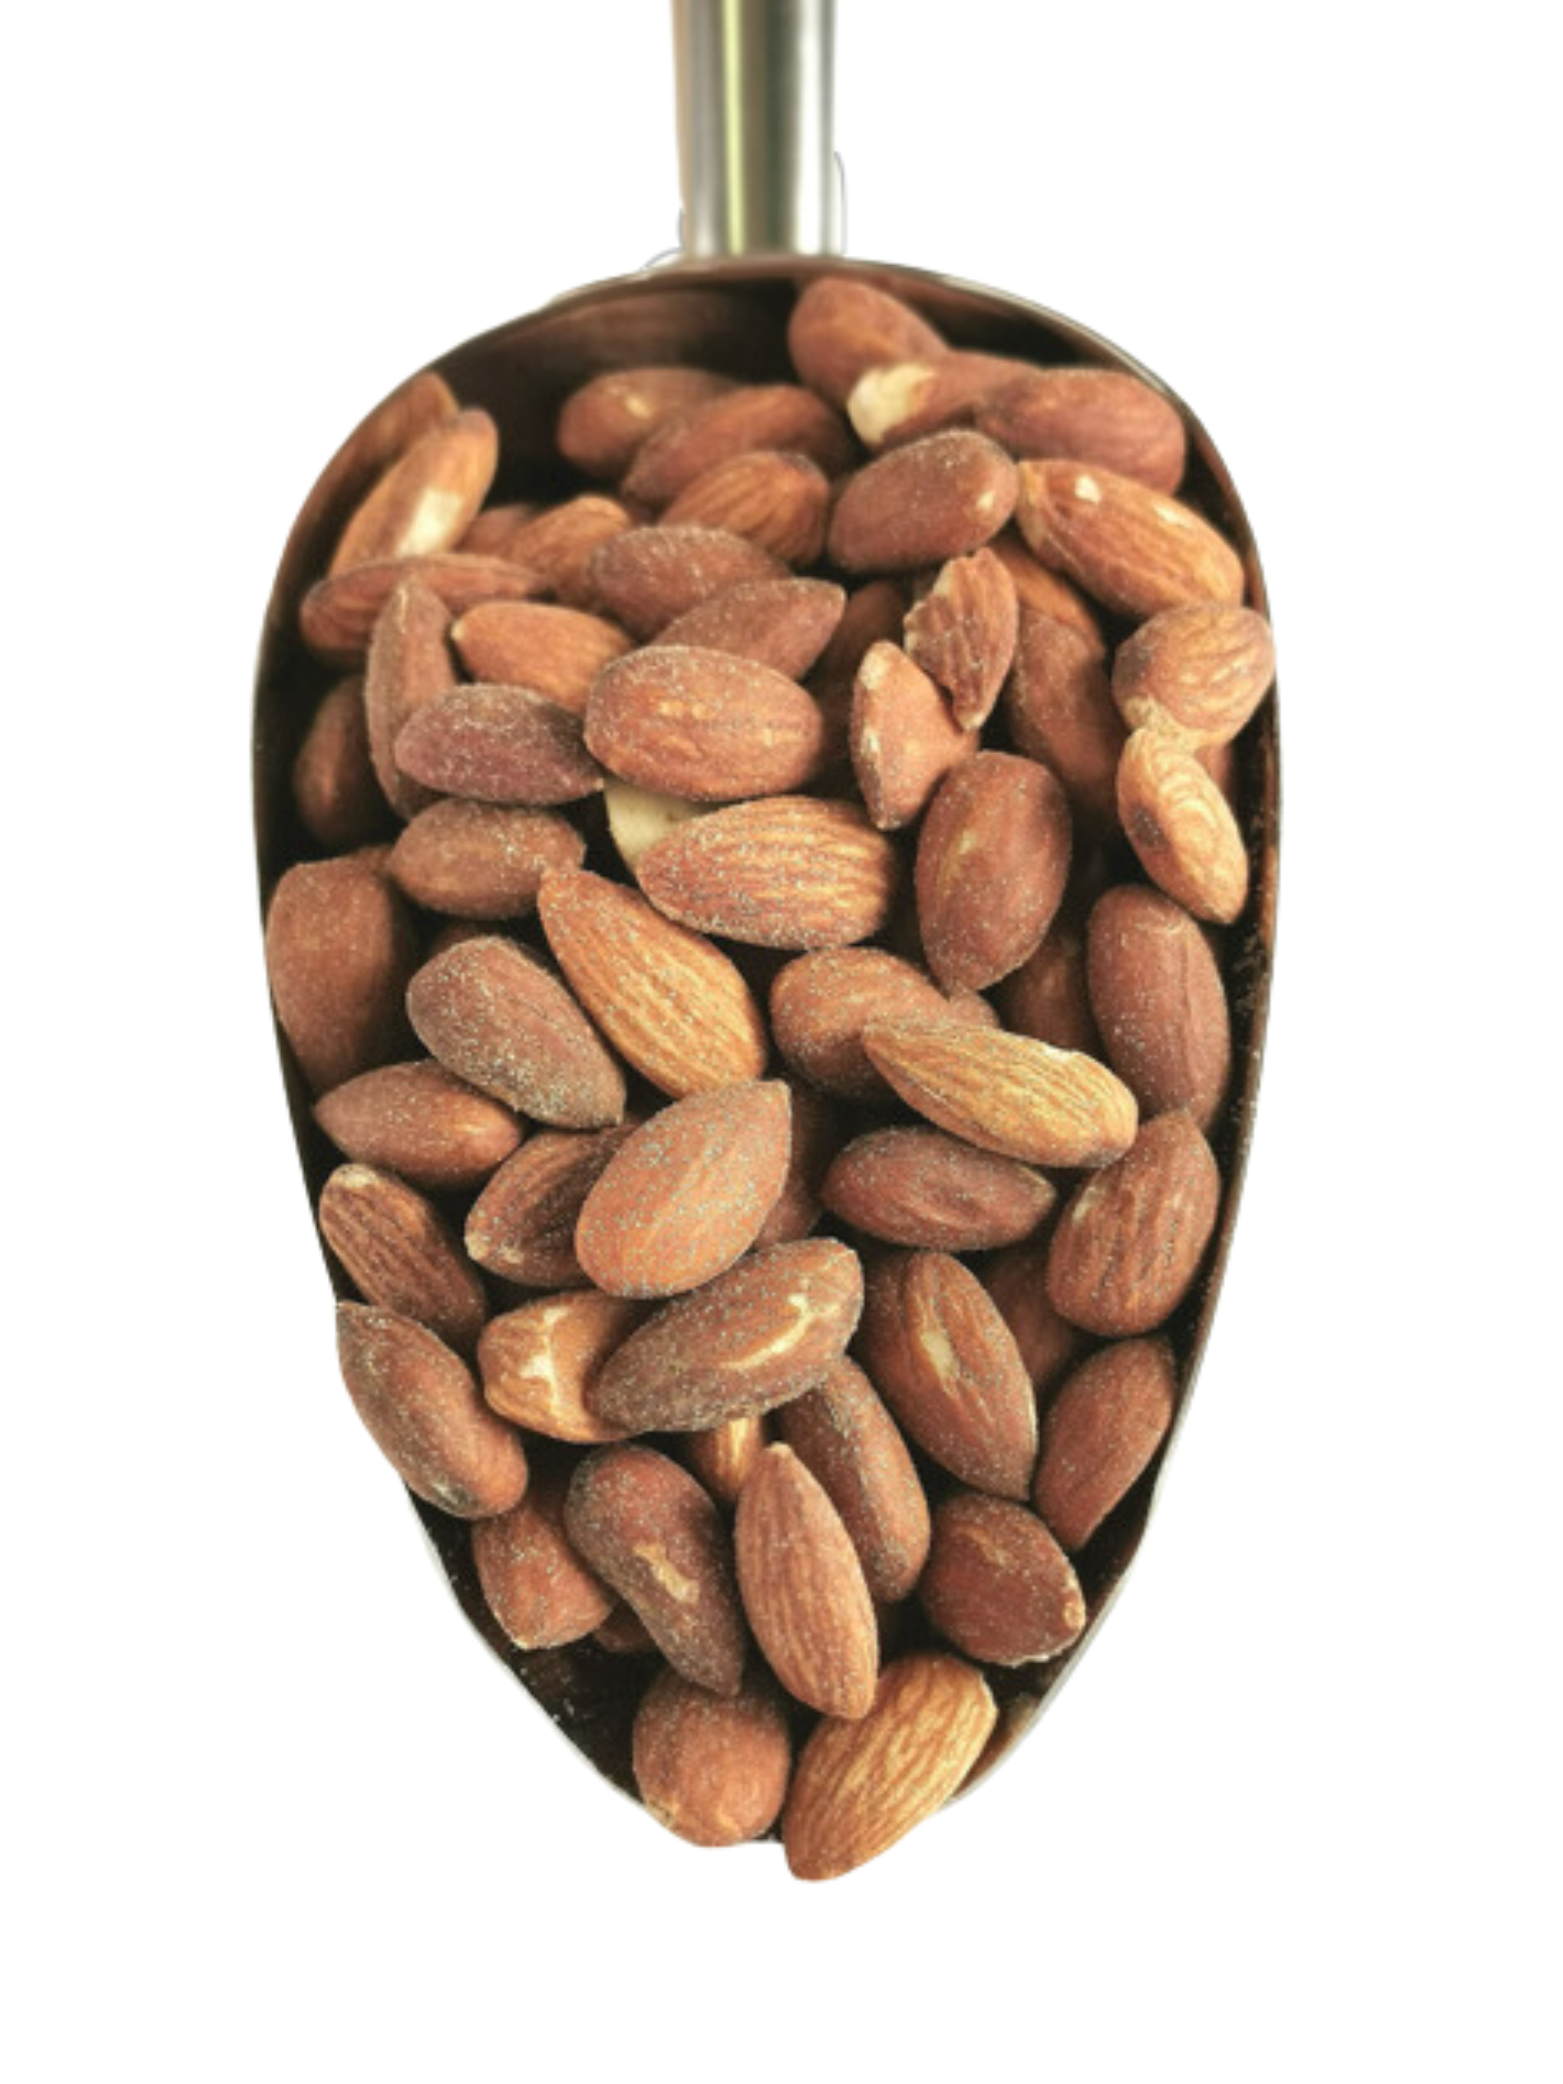 Almonds - Roasted & Salted